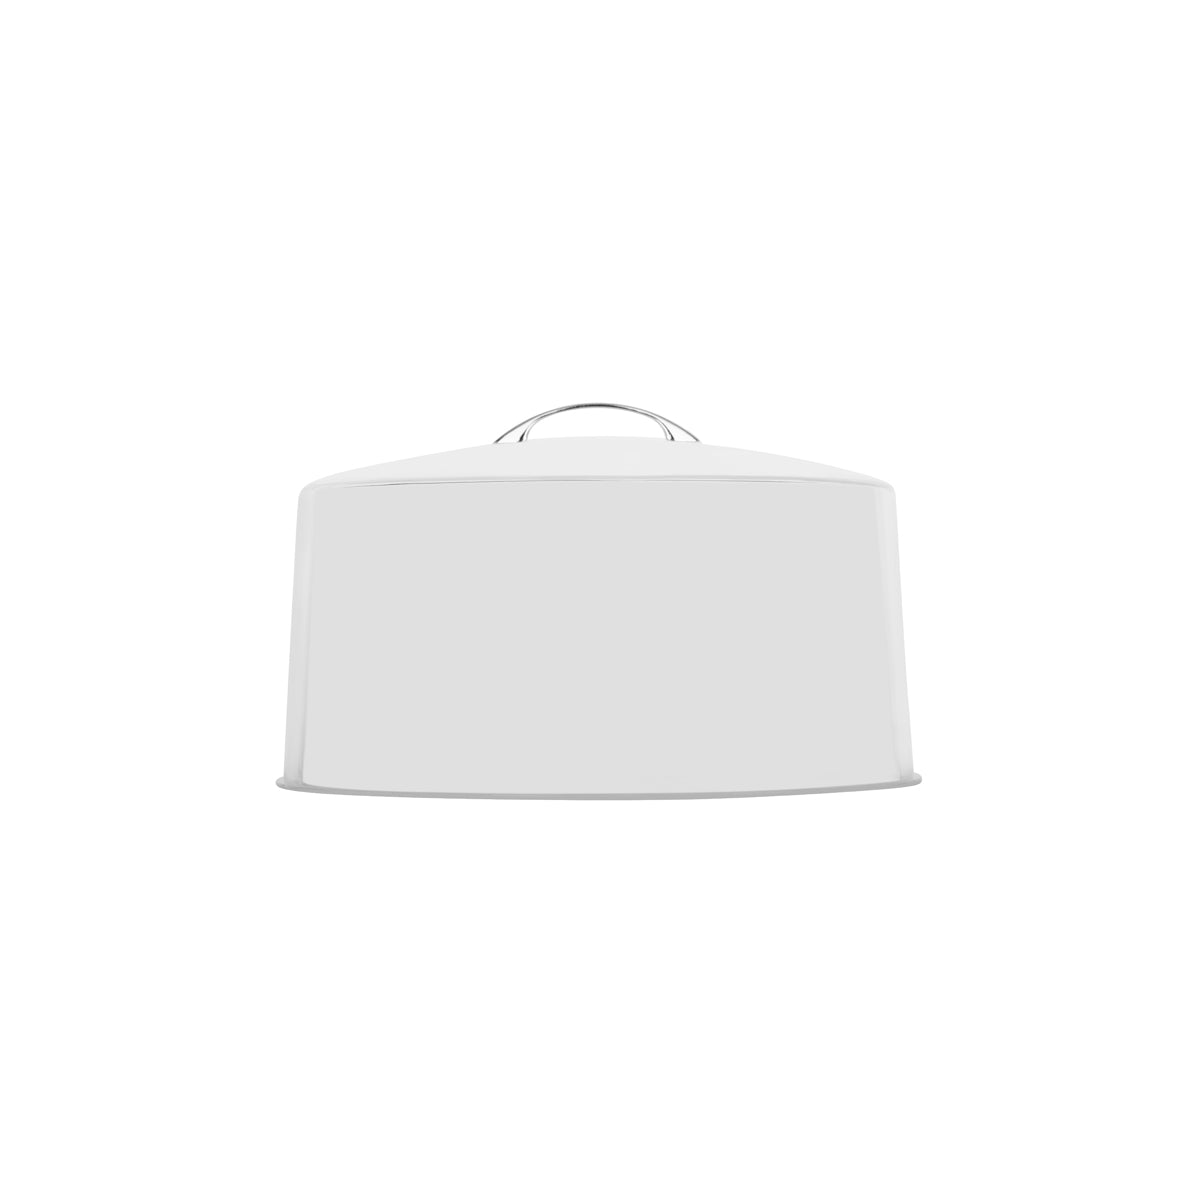 04140 Chef Inox Cake Cover Clear with Chrome Handle 300x185mm Tomkin Australia Hospitality Supplies